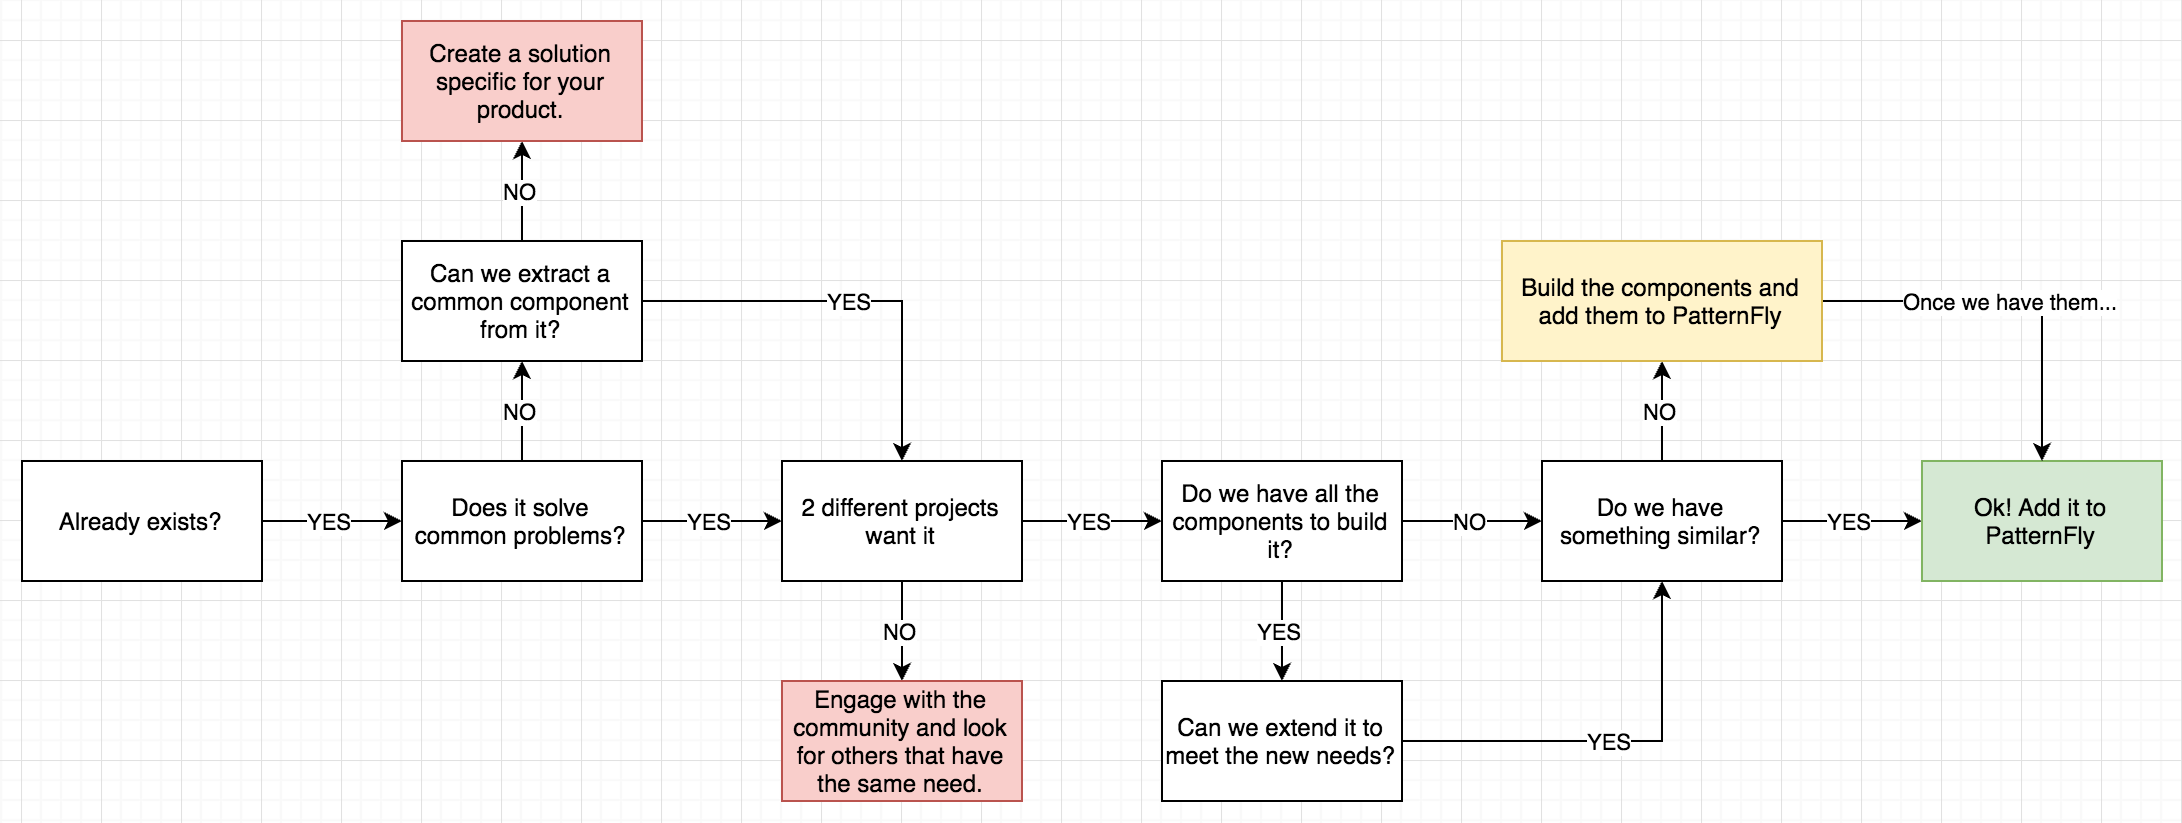 PatternFly decision tree